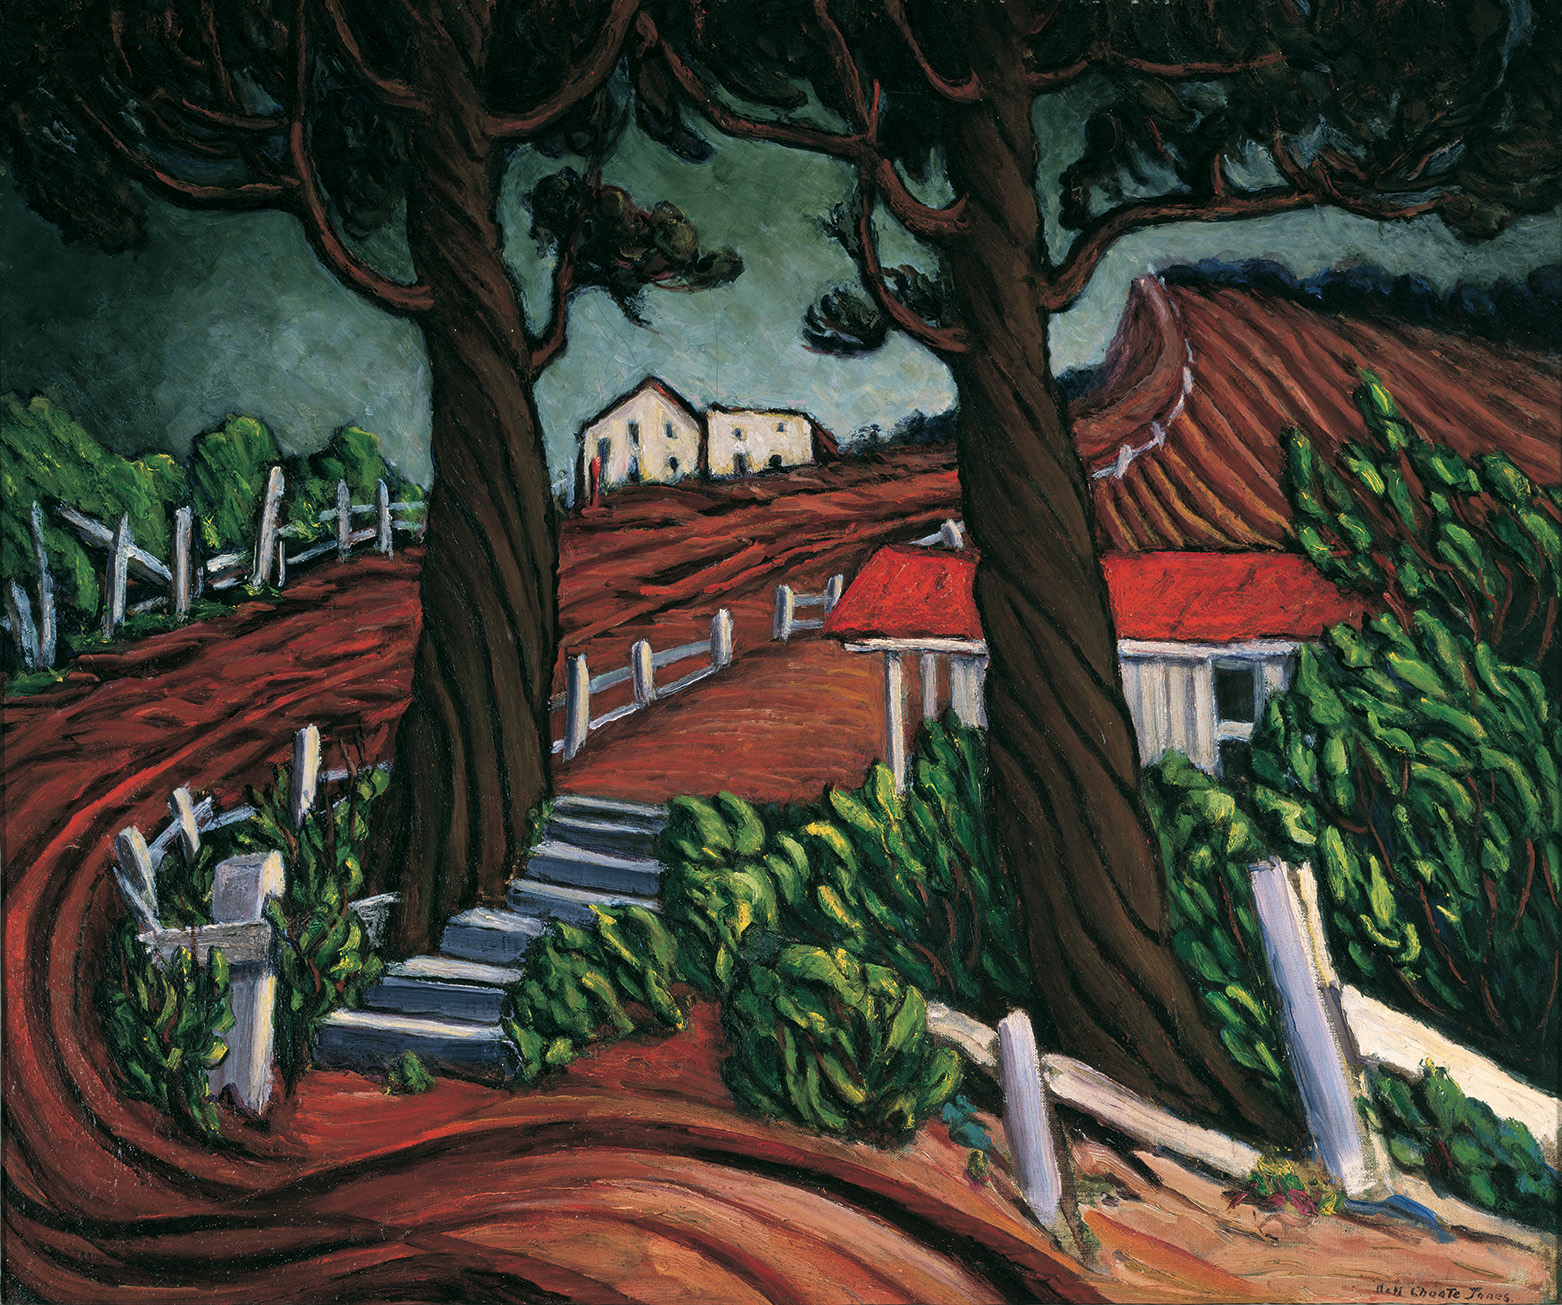 Red path leading from the front to the back of the painting with two large trees in the foreground